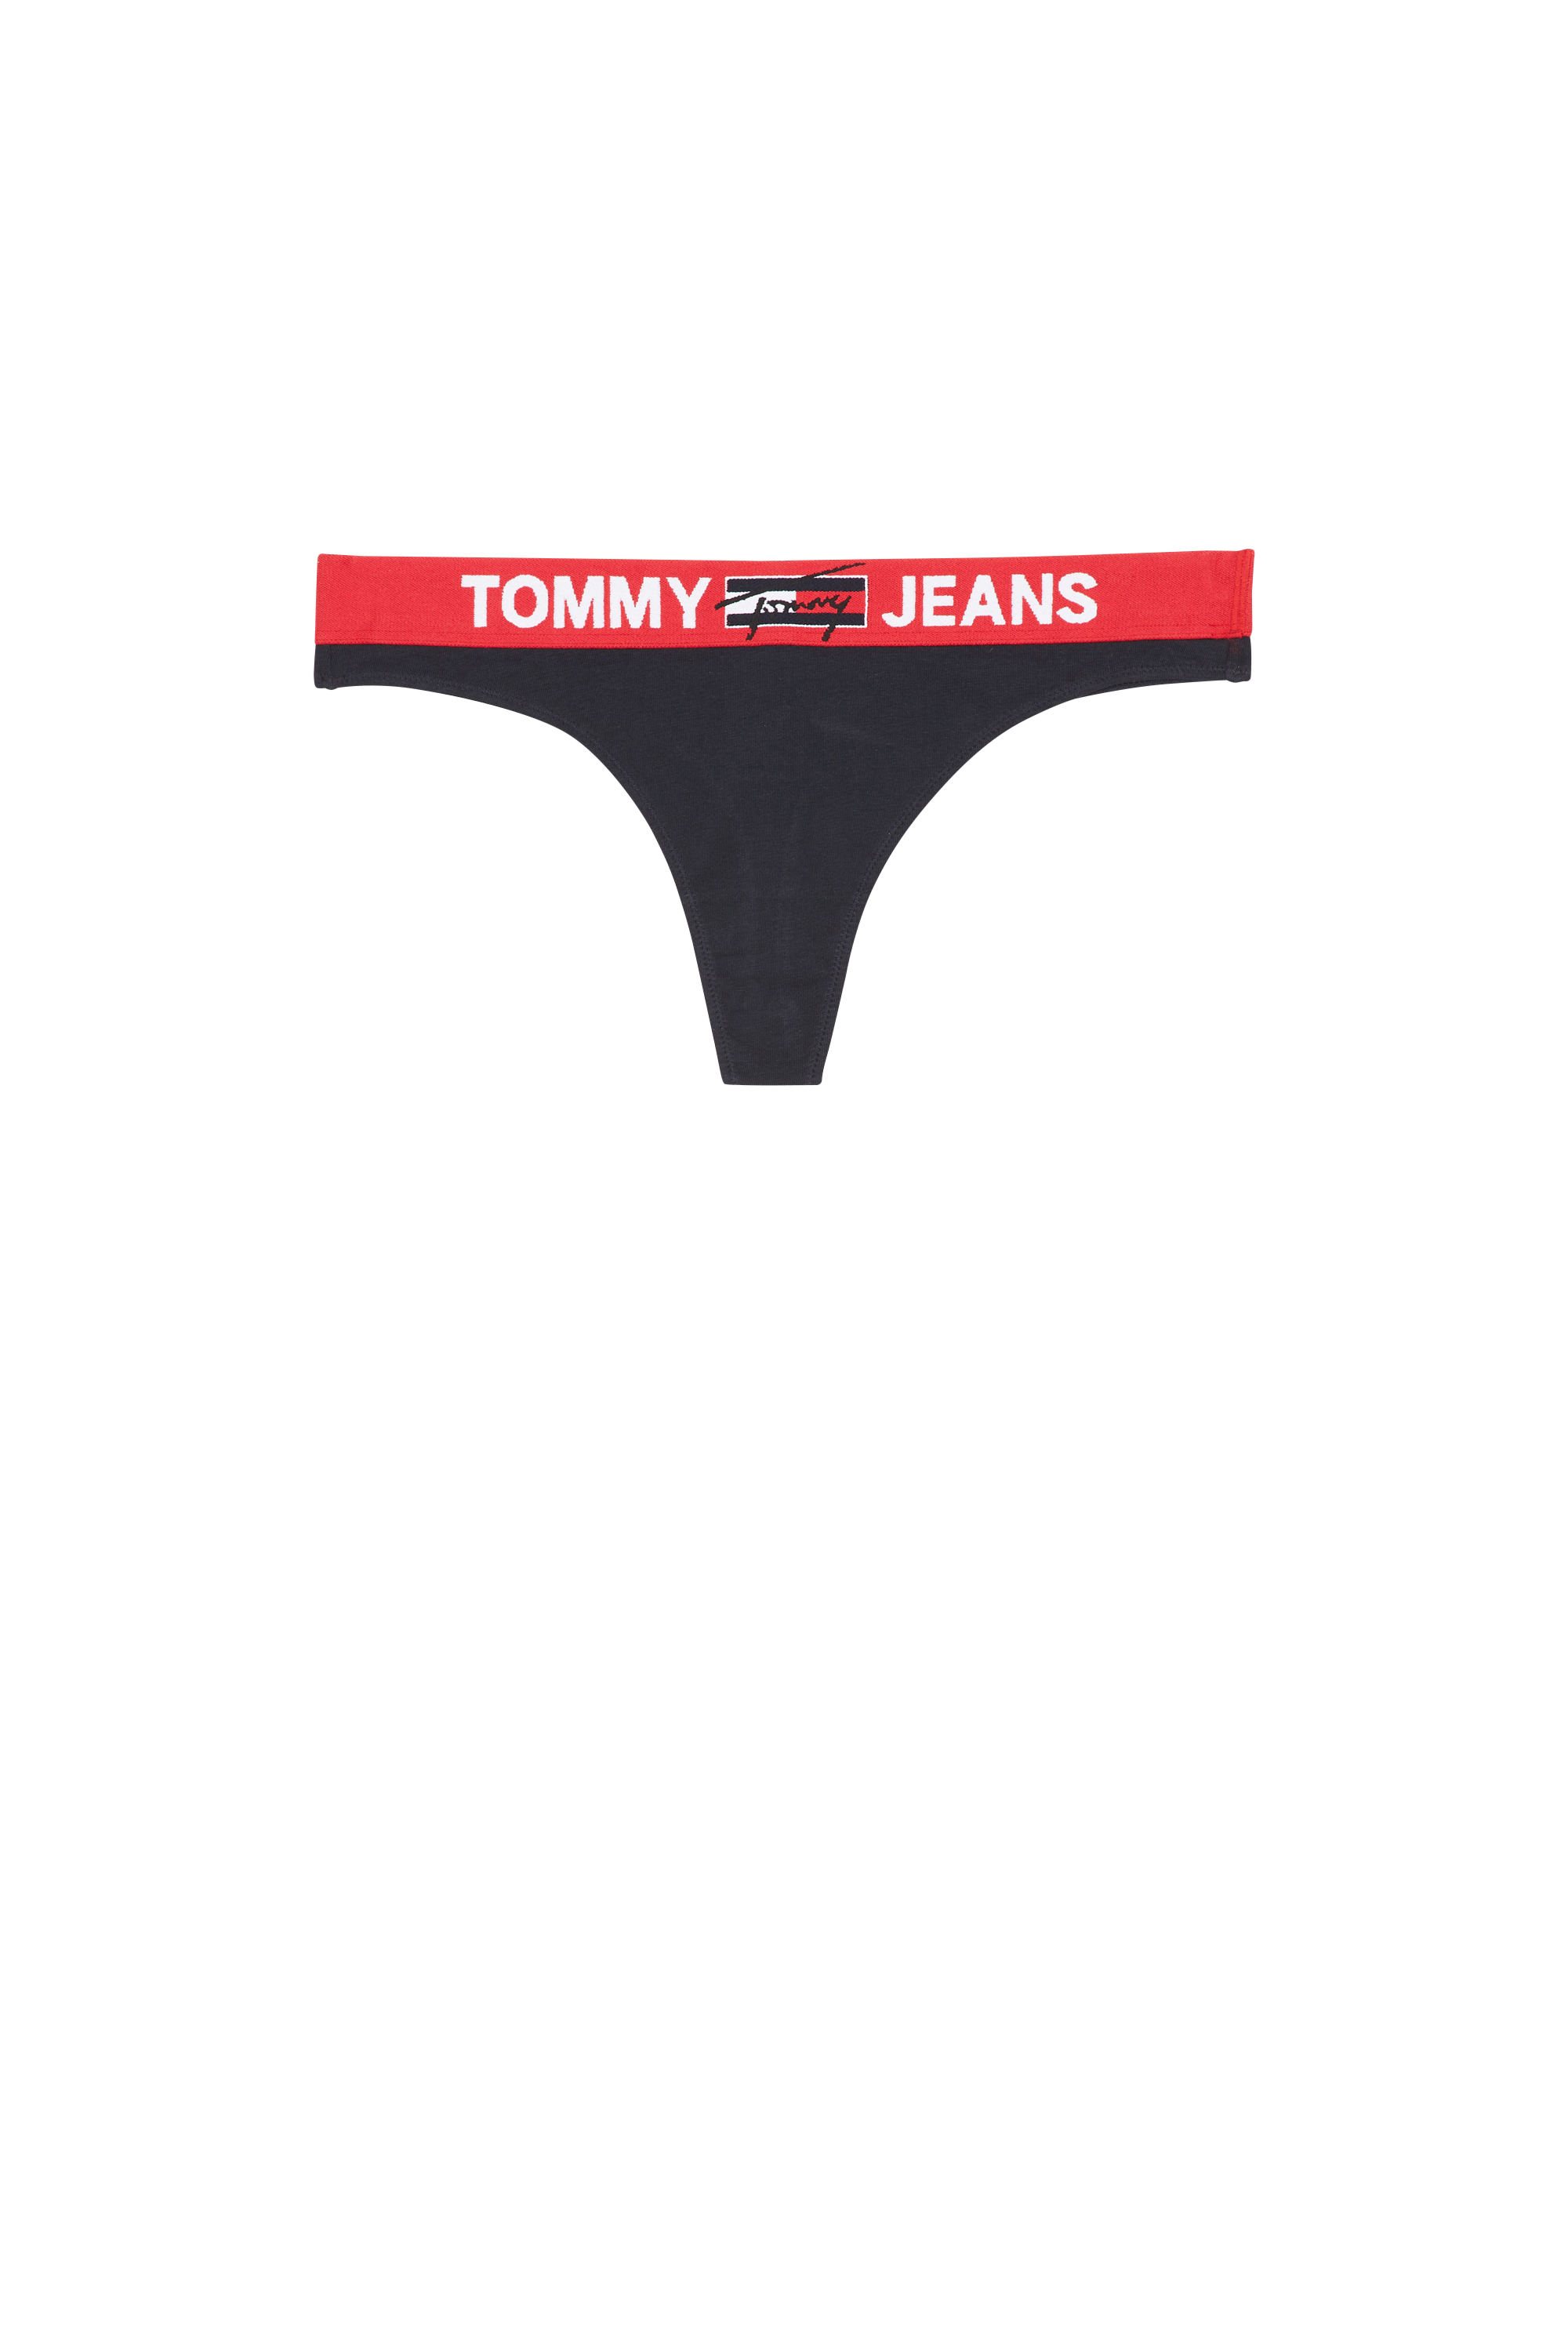 Tommy Hilfiger - String - Taille M